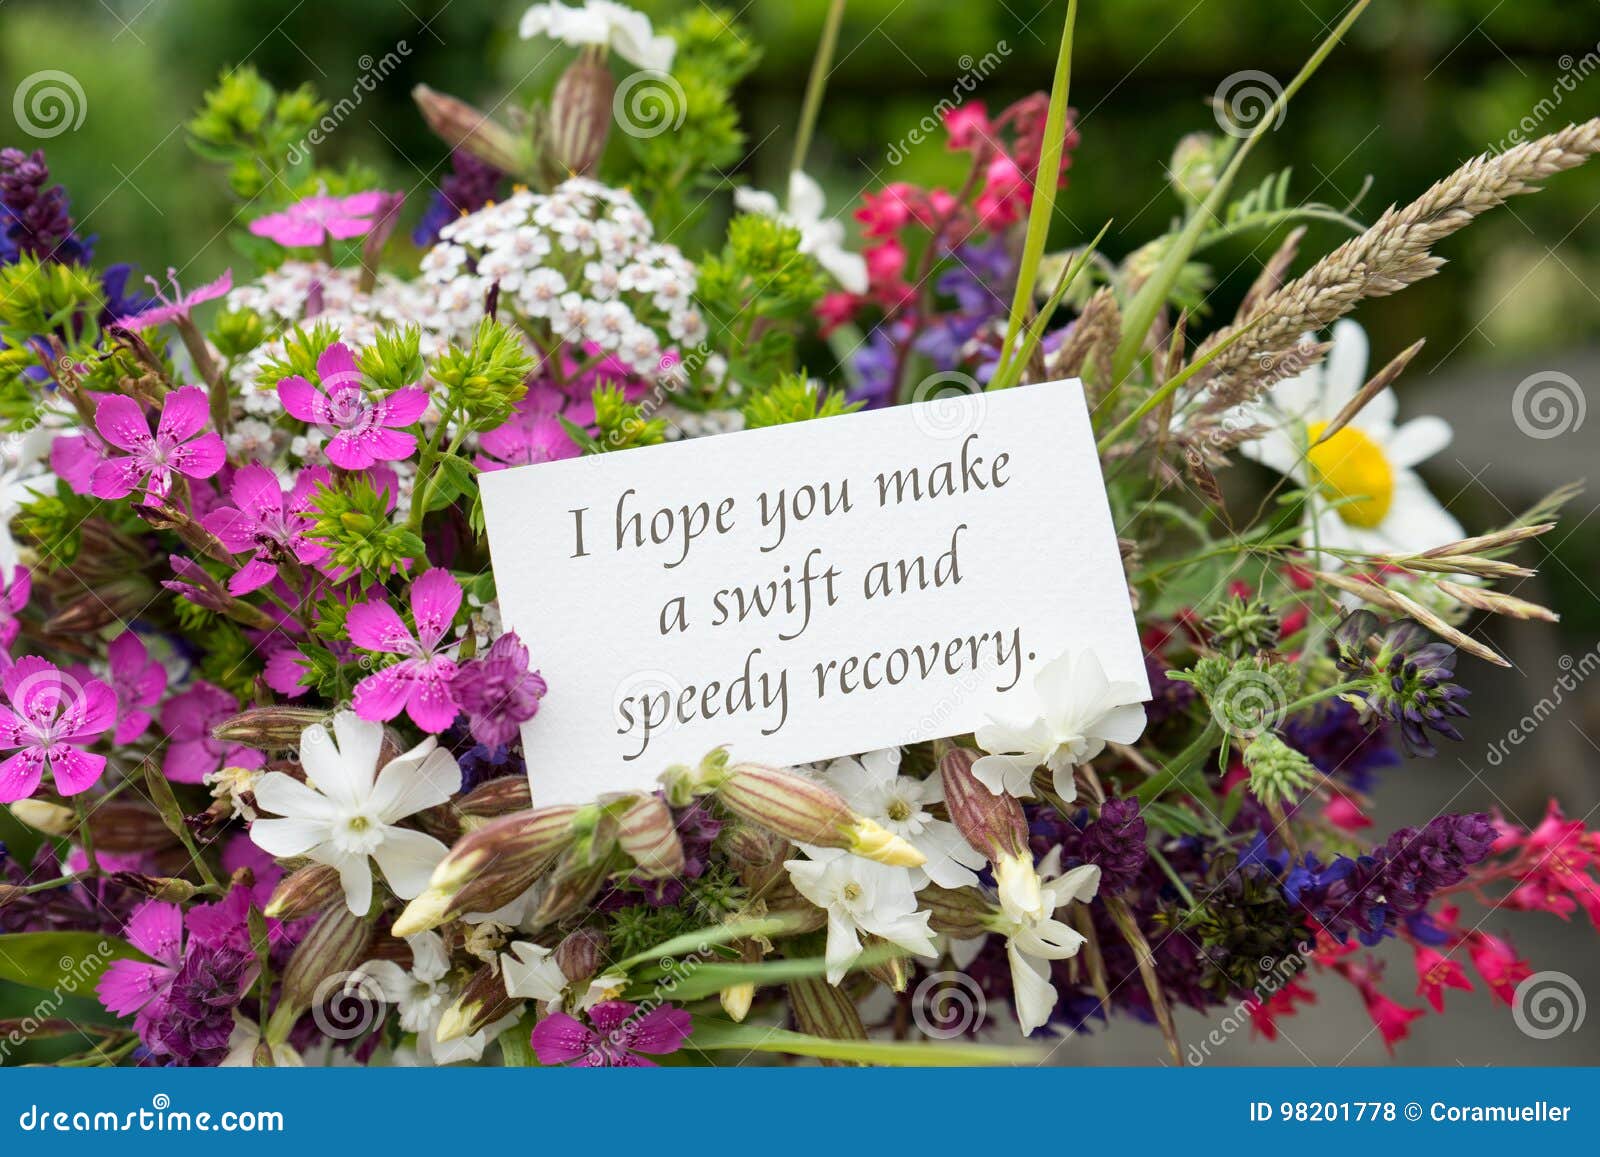 card for recovery with meadow flowers